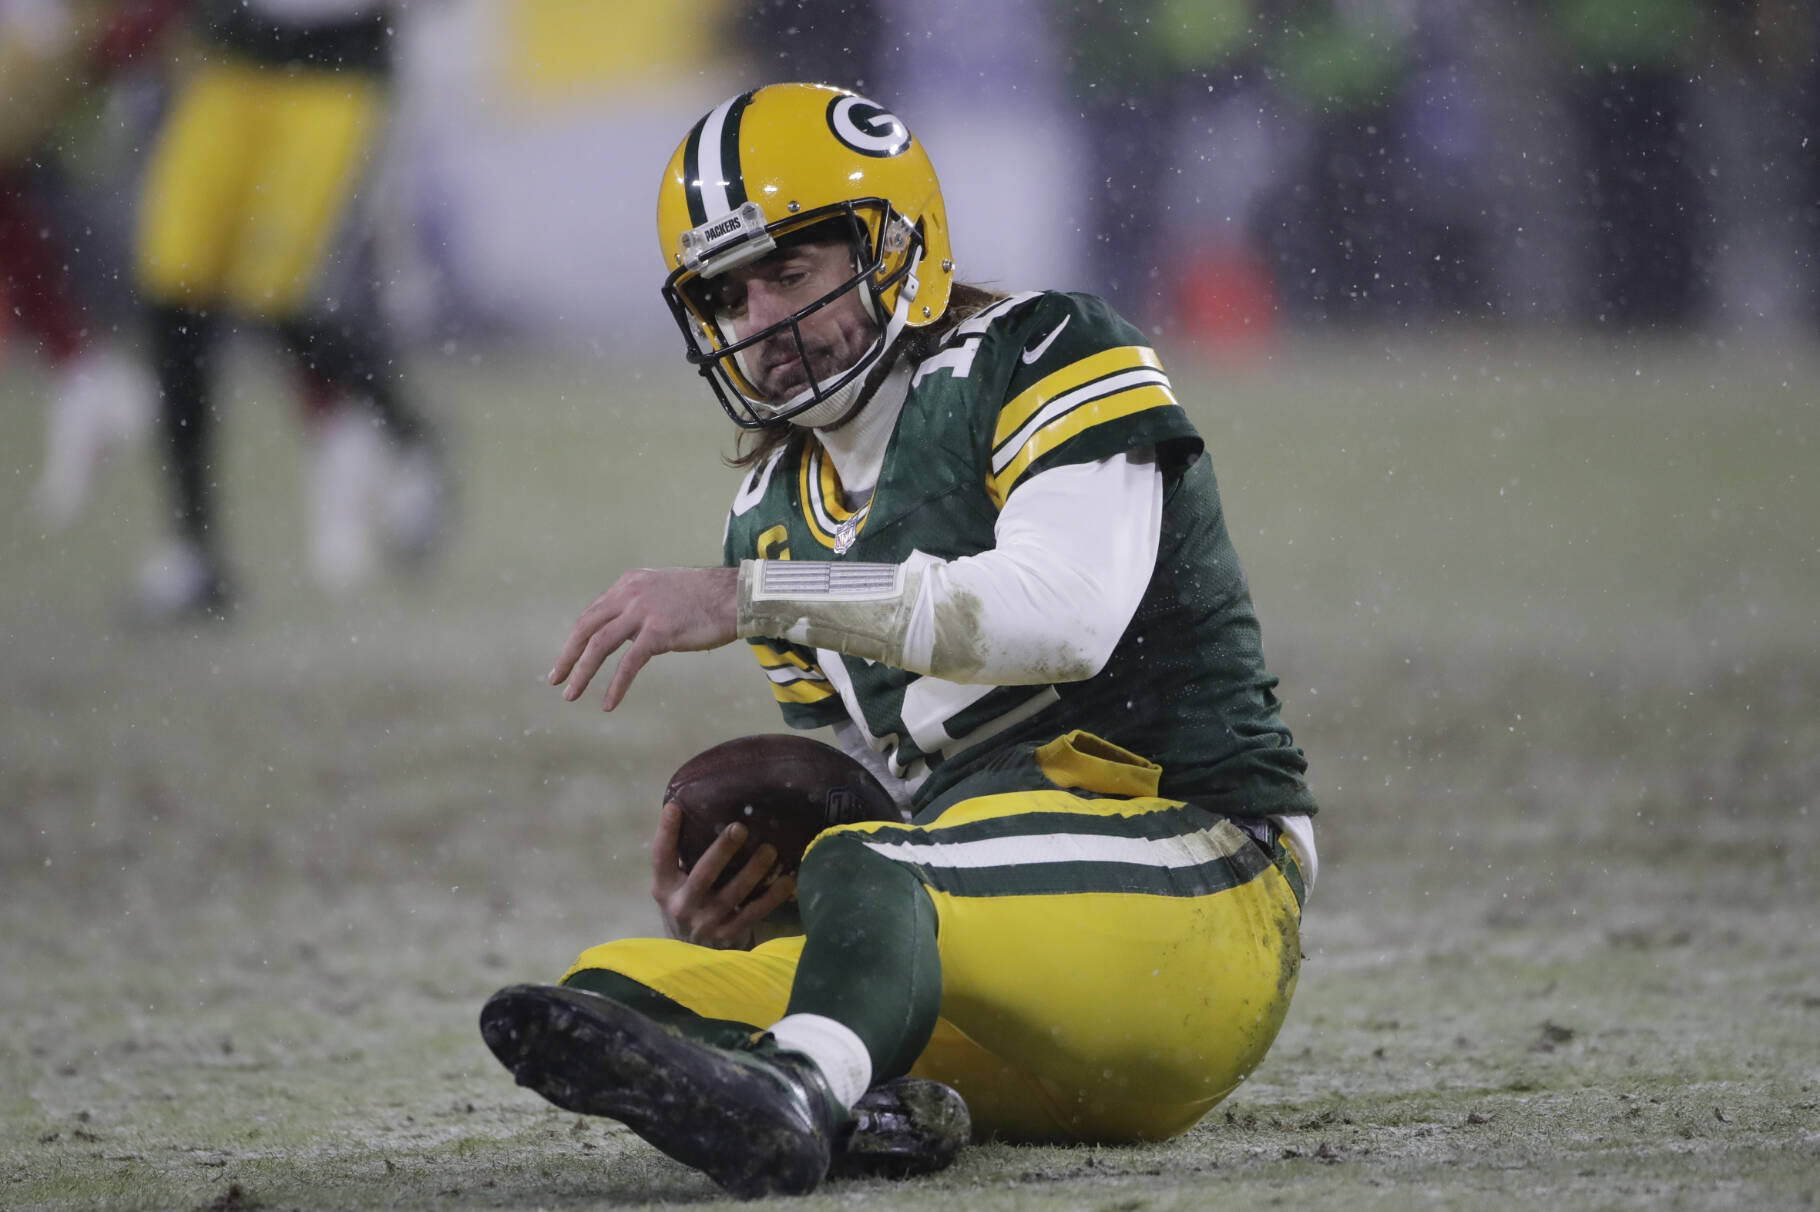 Green Bay Packers’ Aaron Rodgers reacts after being sacked by San Francisco 49ers’ Arik Armstead during the second half of an NFC divisional playoff NFL football game Saturday, Jan. 22, 2022, in Green Bay, Wis. (AP Photo/Aaron Gash)